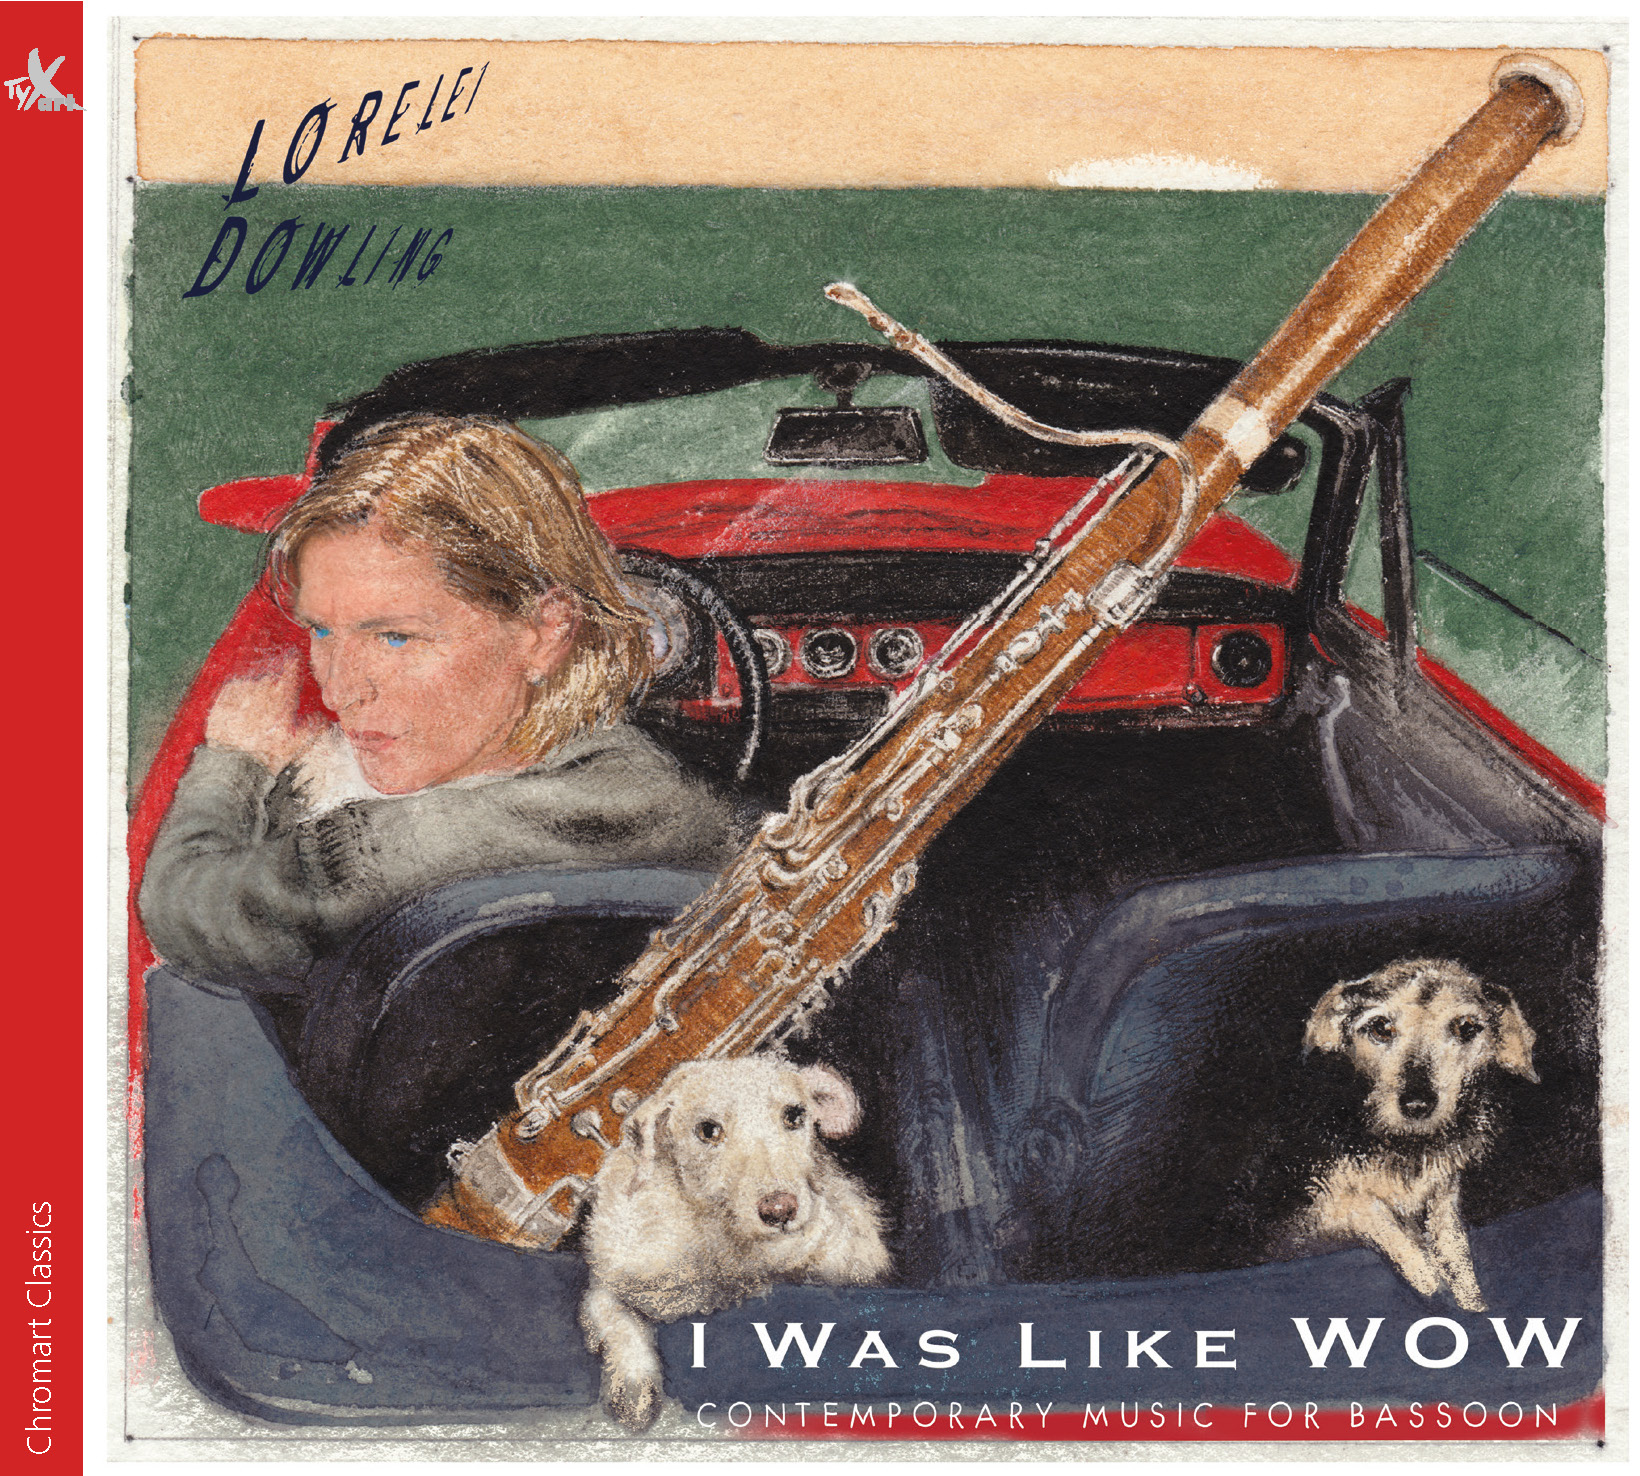 I was like WOW - Contemporary Music for Bassoon, Lorelei Dowling & Ensembles